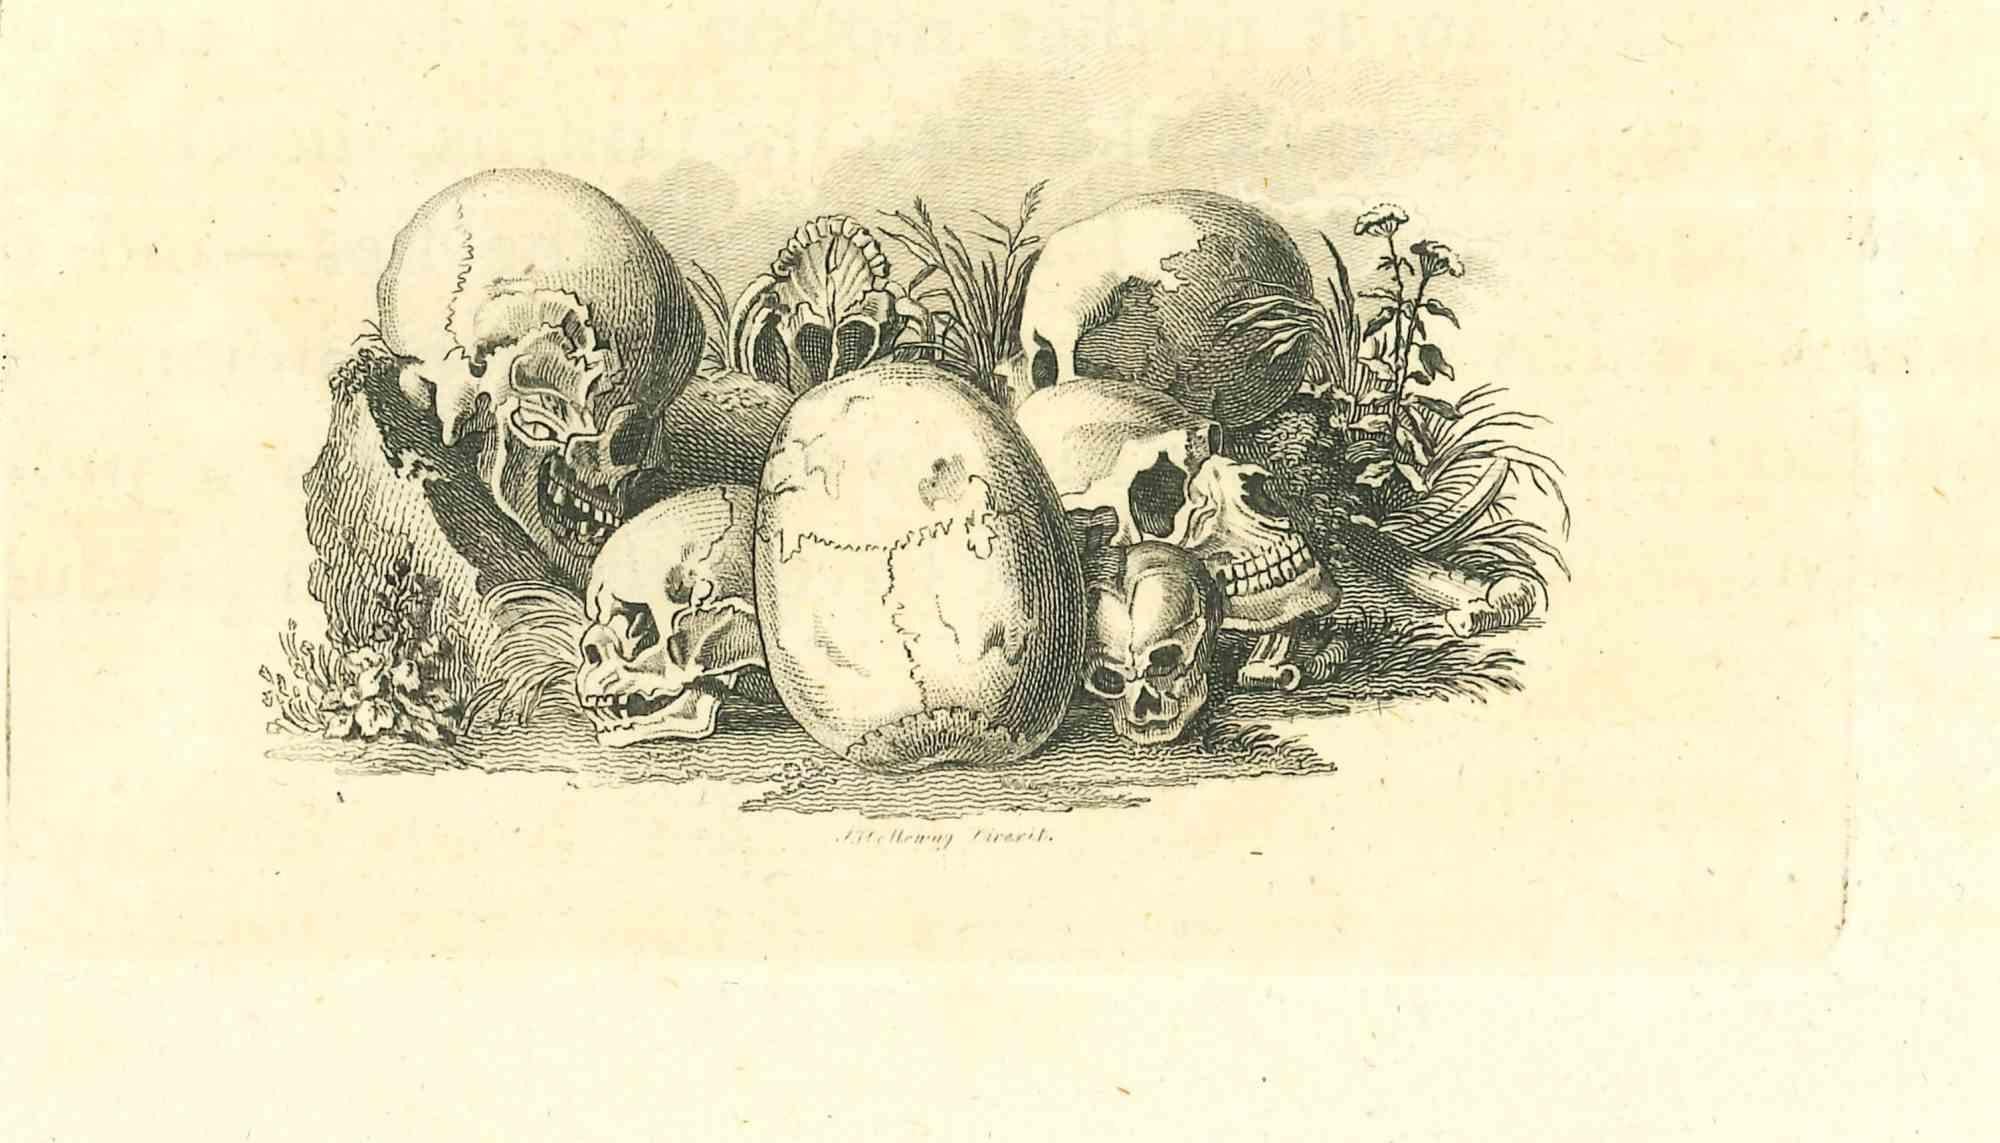 Skulls is an etching realized by Thomas Holloway for Johann Caspar Lavater's "Essays on Physiognomy, Designed to Promote the Knowledge and the Love of Mankind", London, Bensley, 1810. 

Good conditions.

Johann Caspar Lavater was a swiss theologian